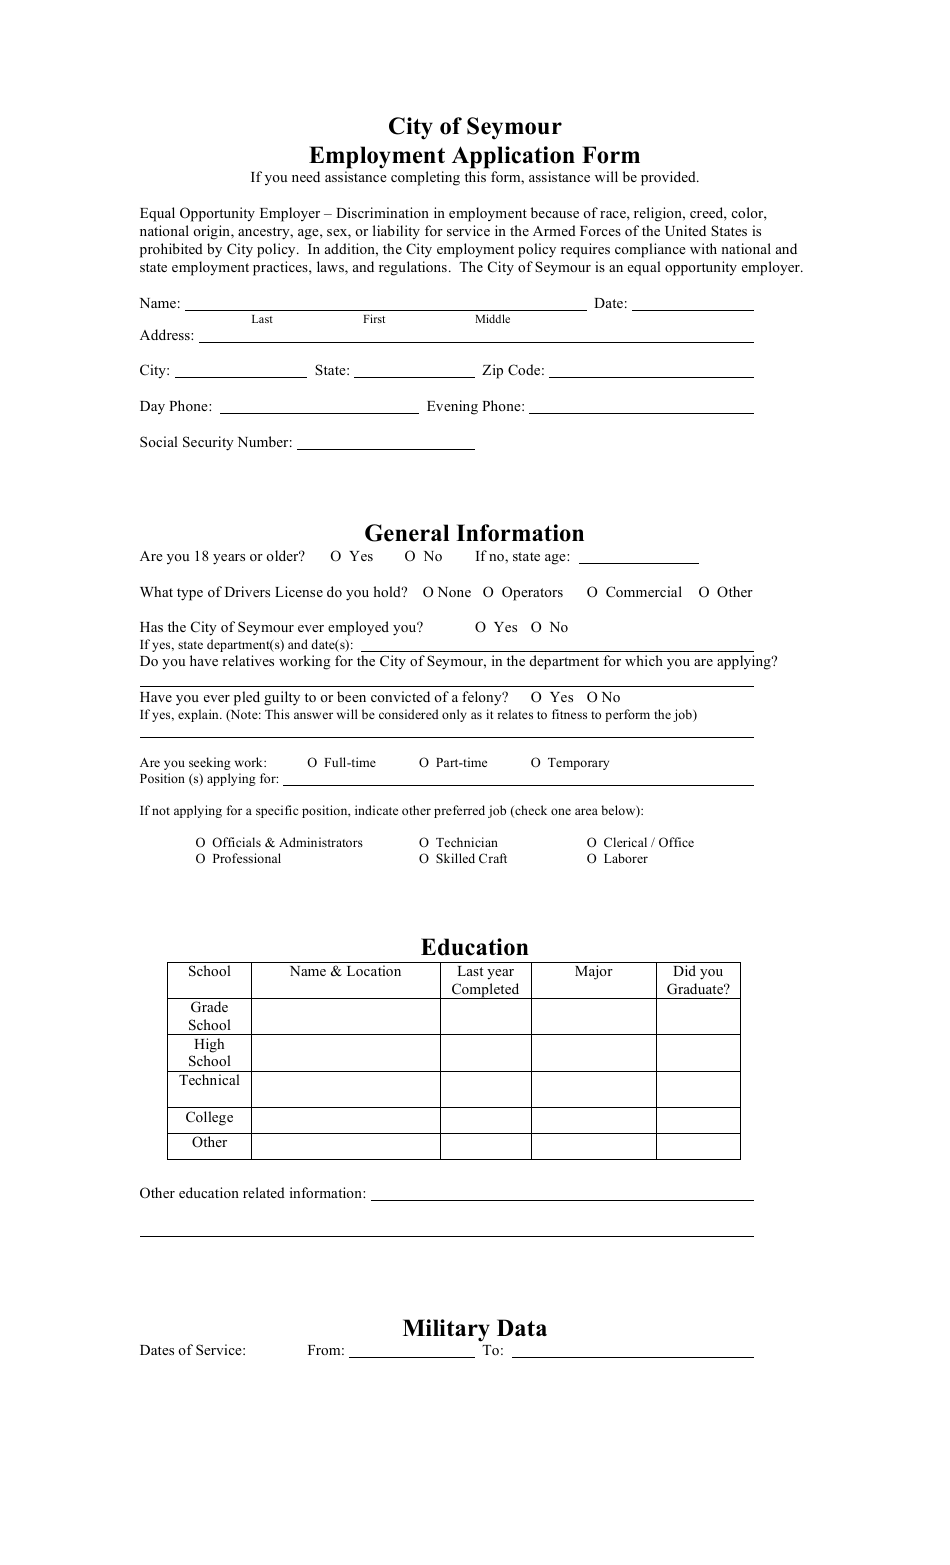 Employment Application Form - City of Seymour, Indiana, Page 1